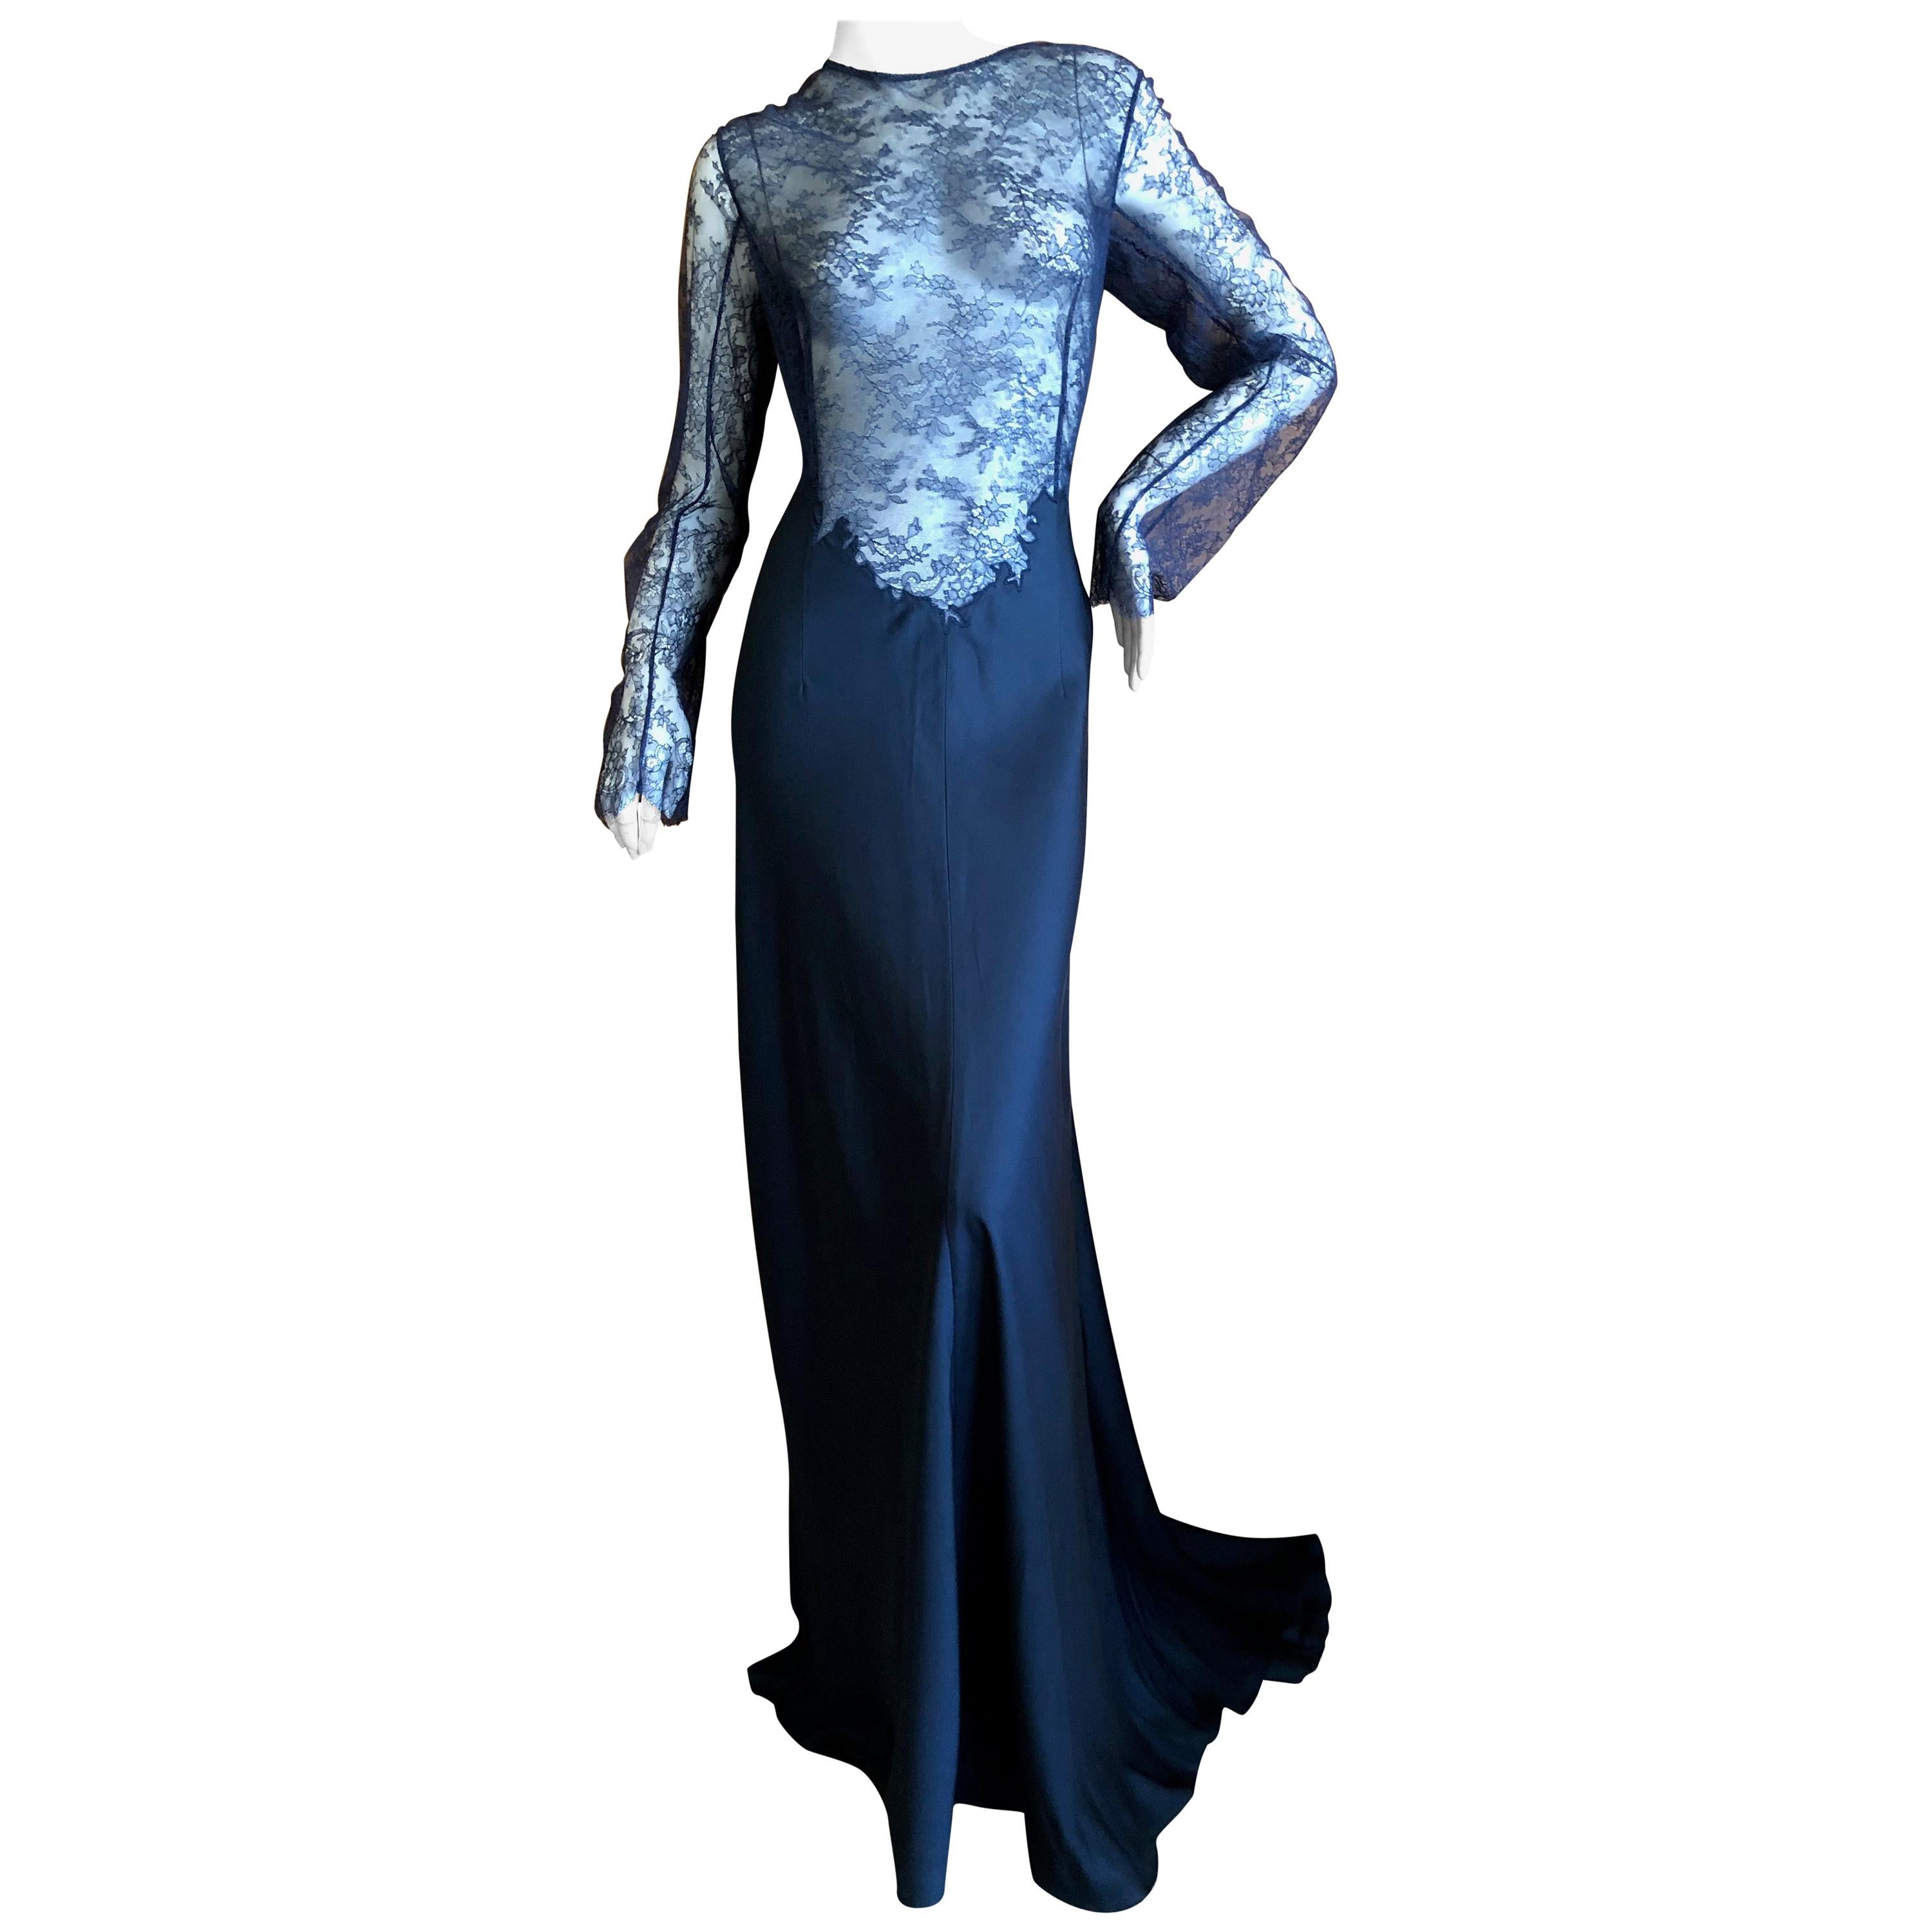 Nina Ricci by Peter Copping Navy Blue Sheer Lace Evening Dress with Train